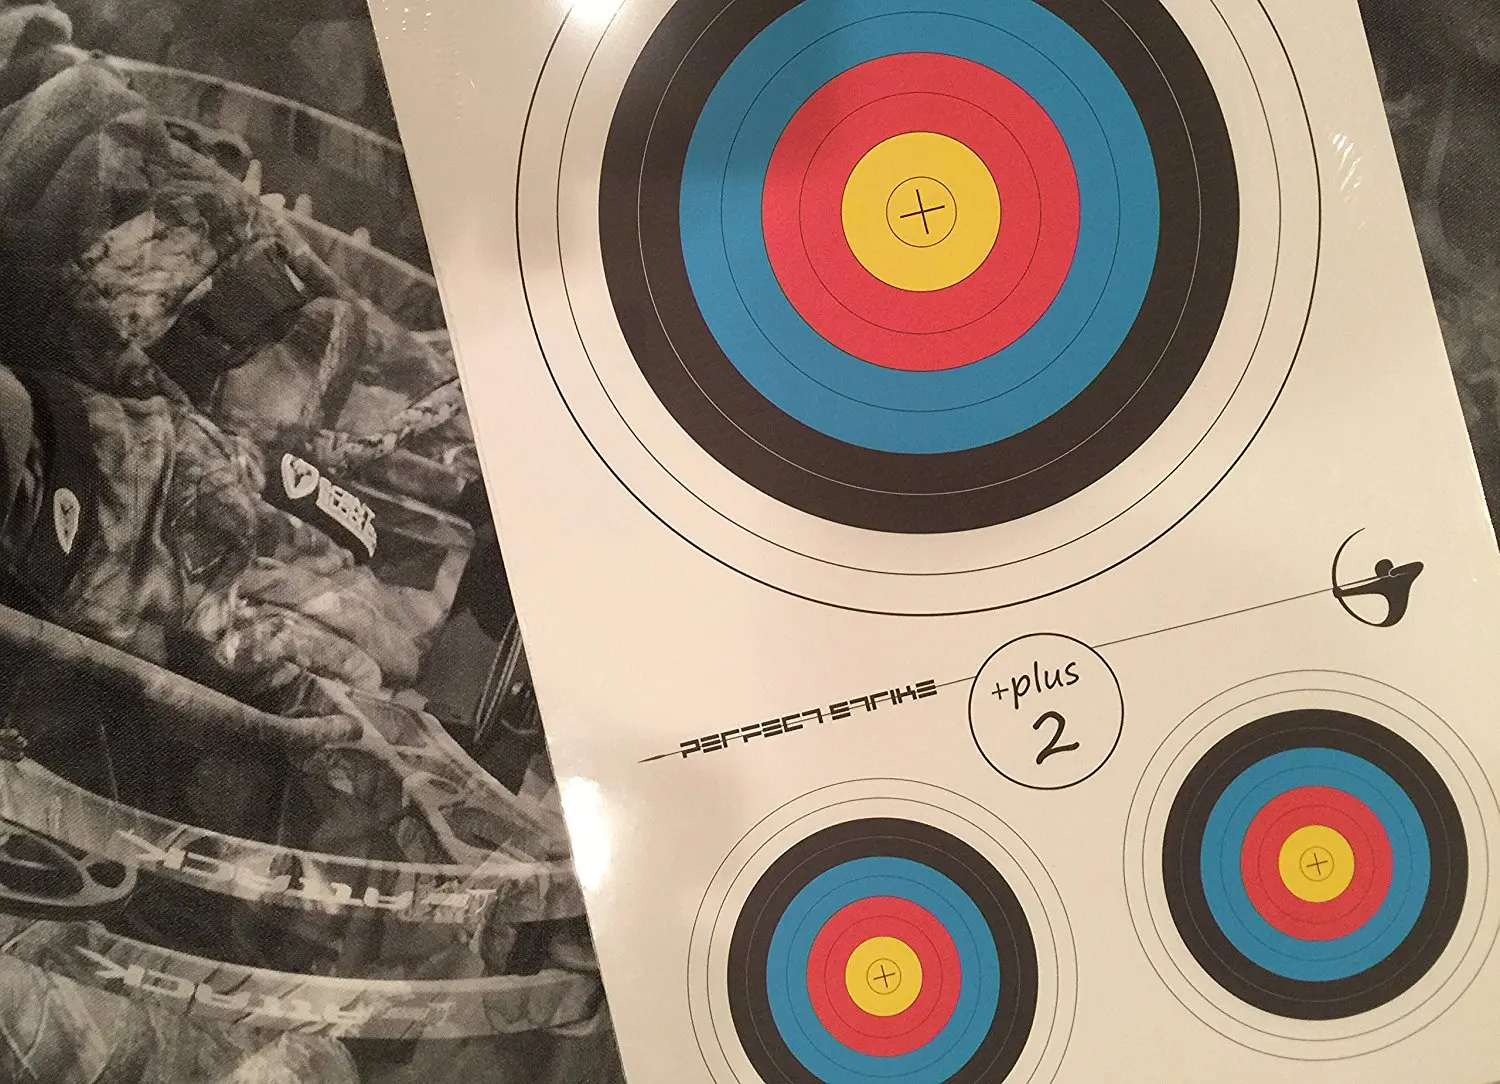 Cheap Printable Archery Targets Find Printable Archery Targets Deals On Line At Alibaba Com